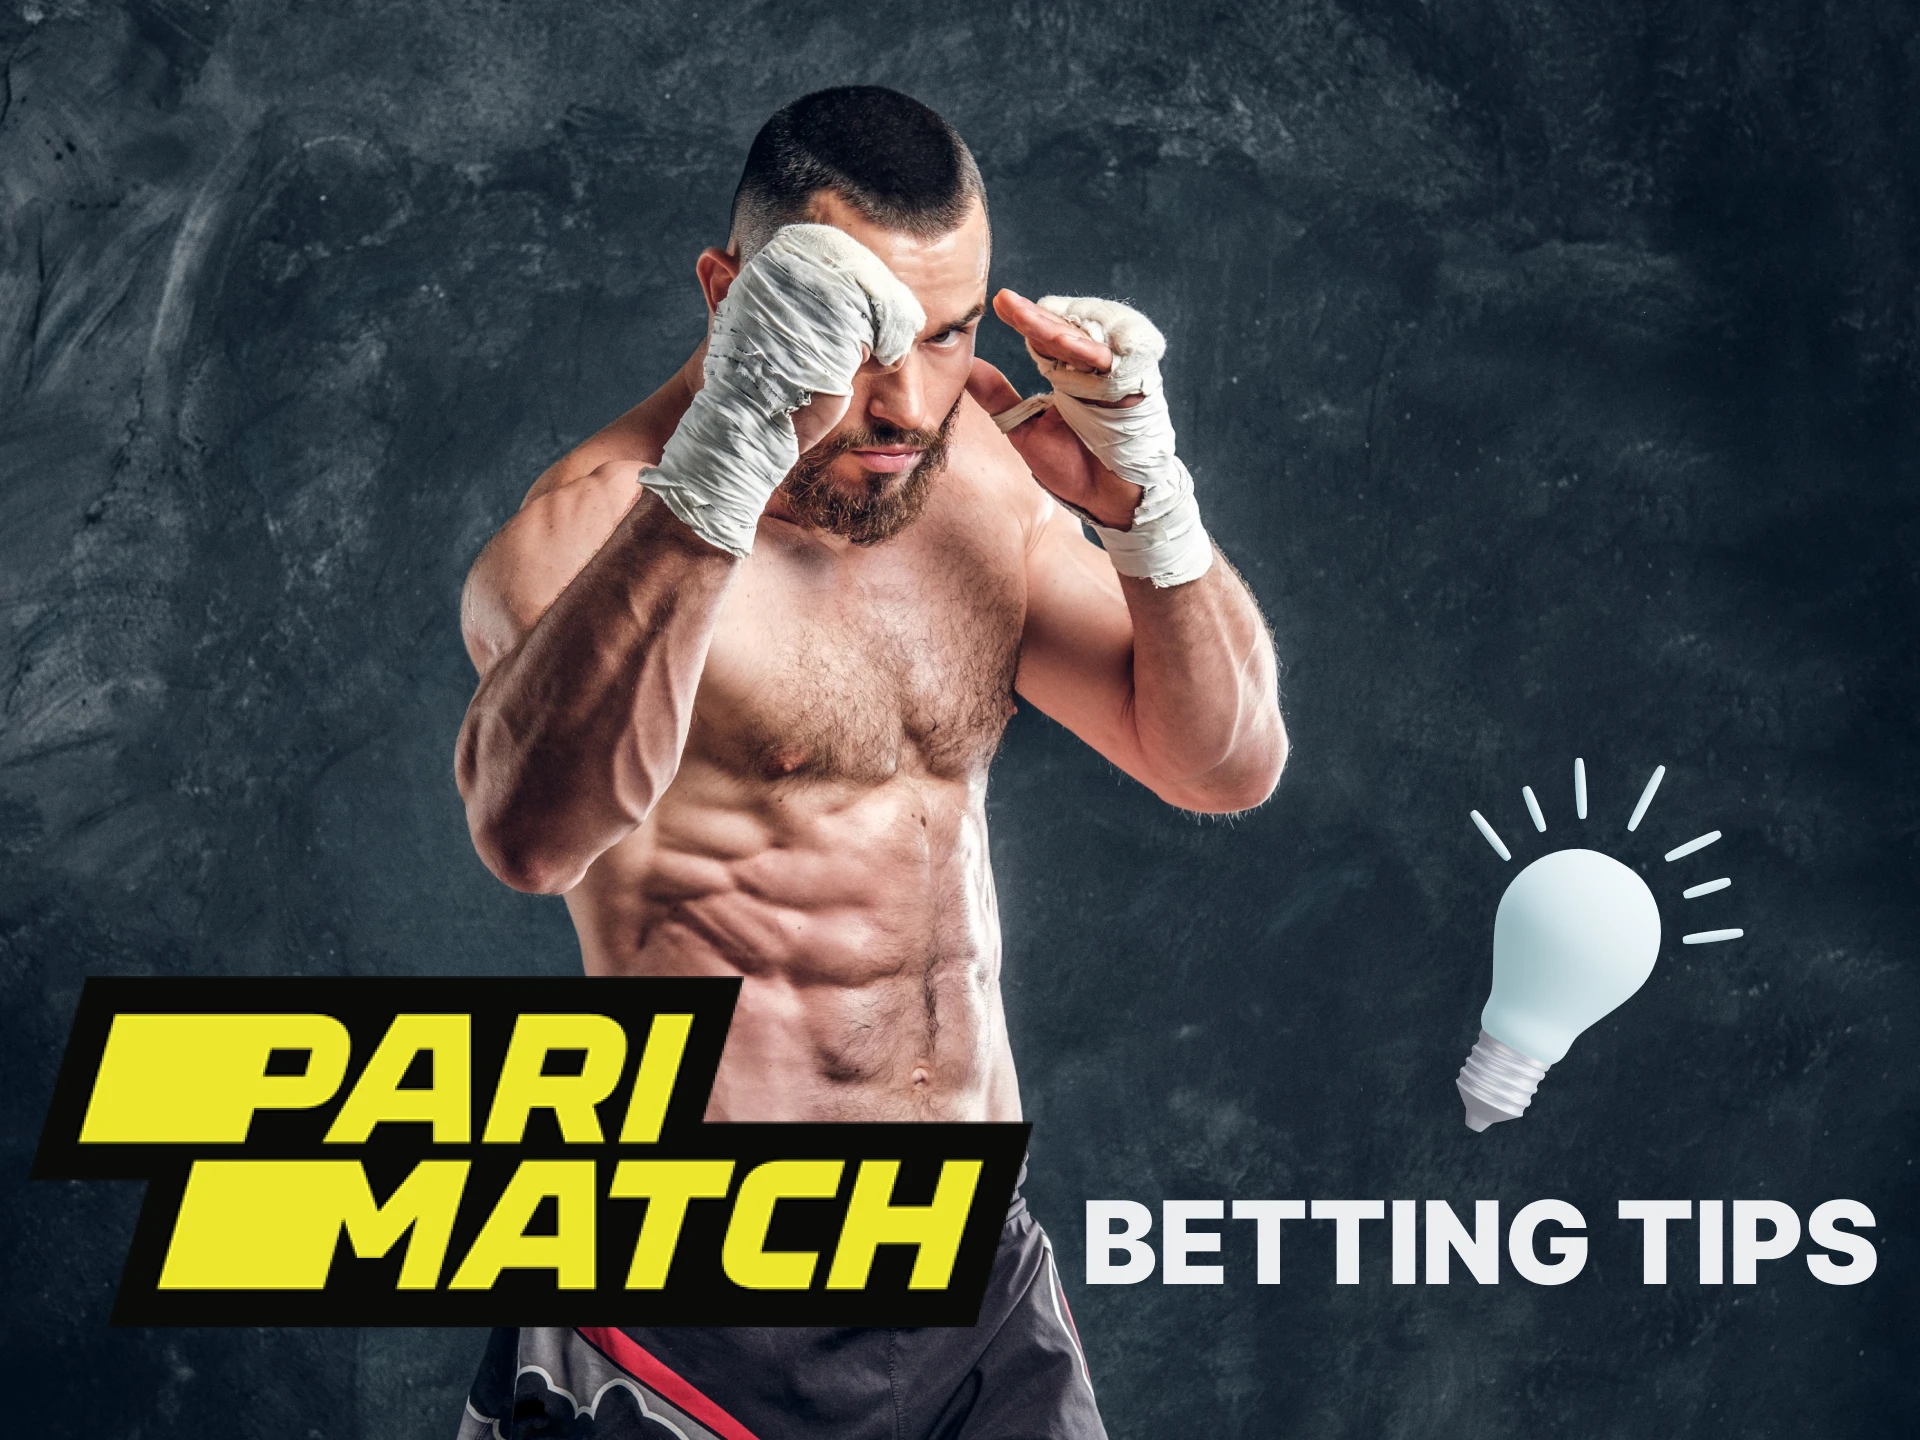 Learn the top tips for betting on UFC matches.